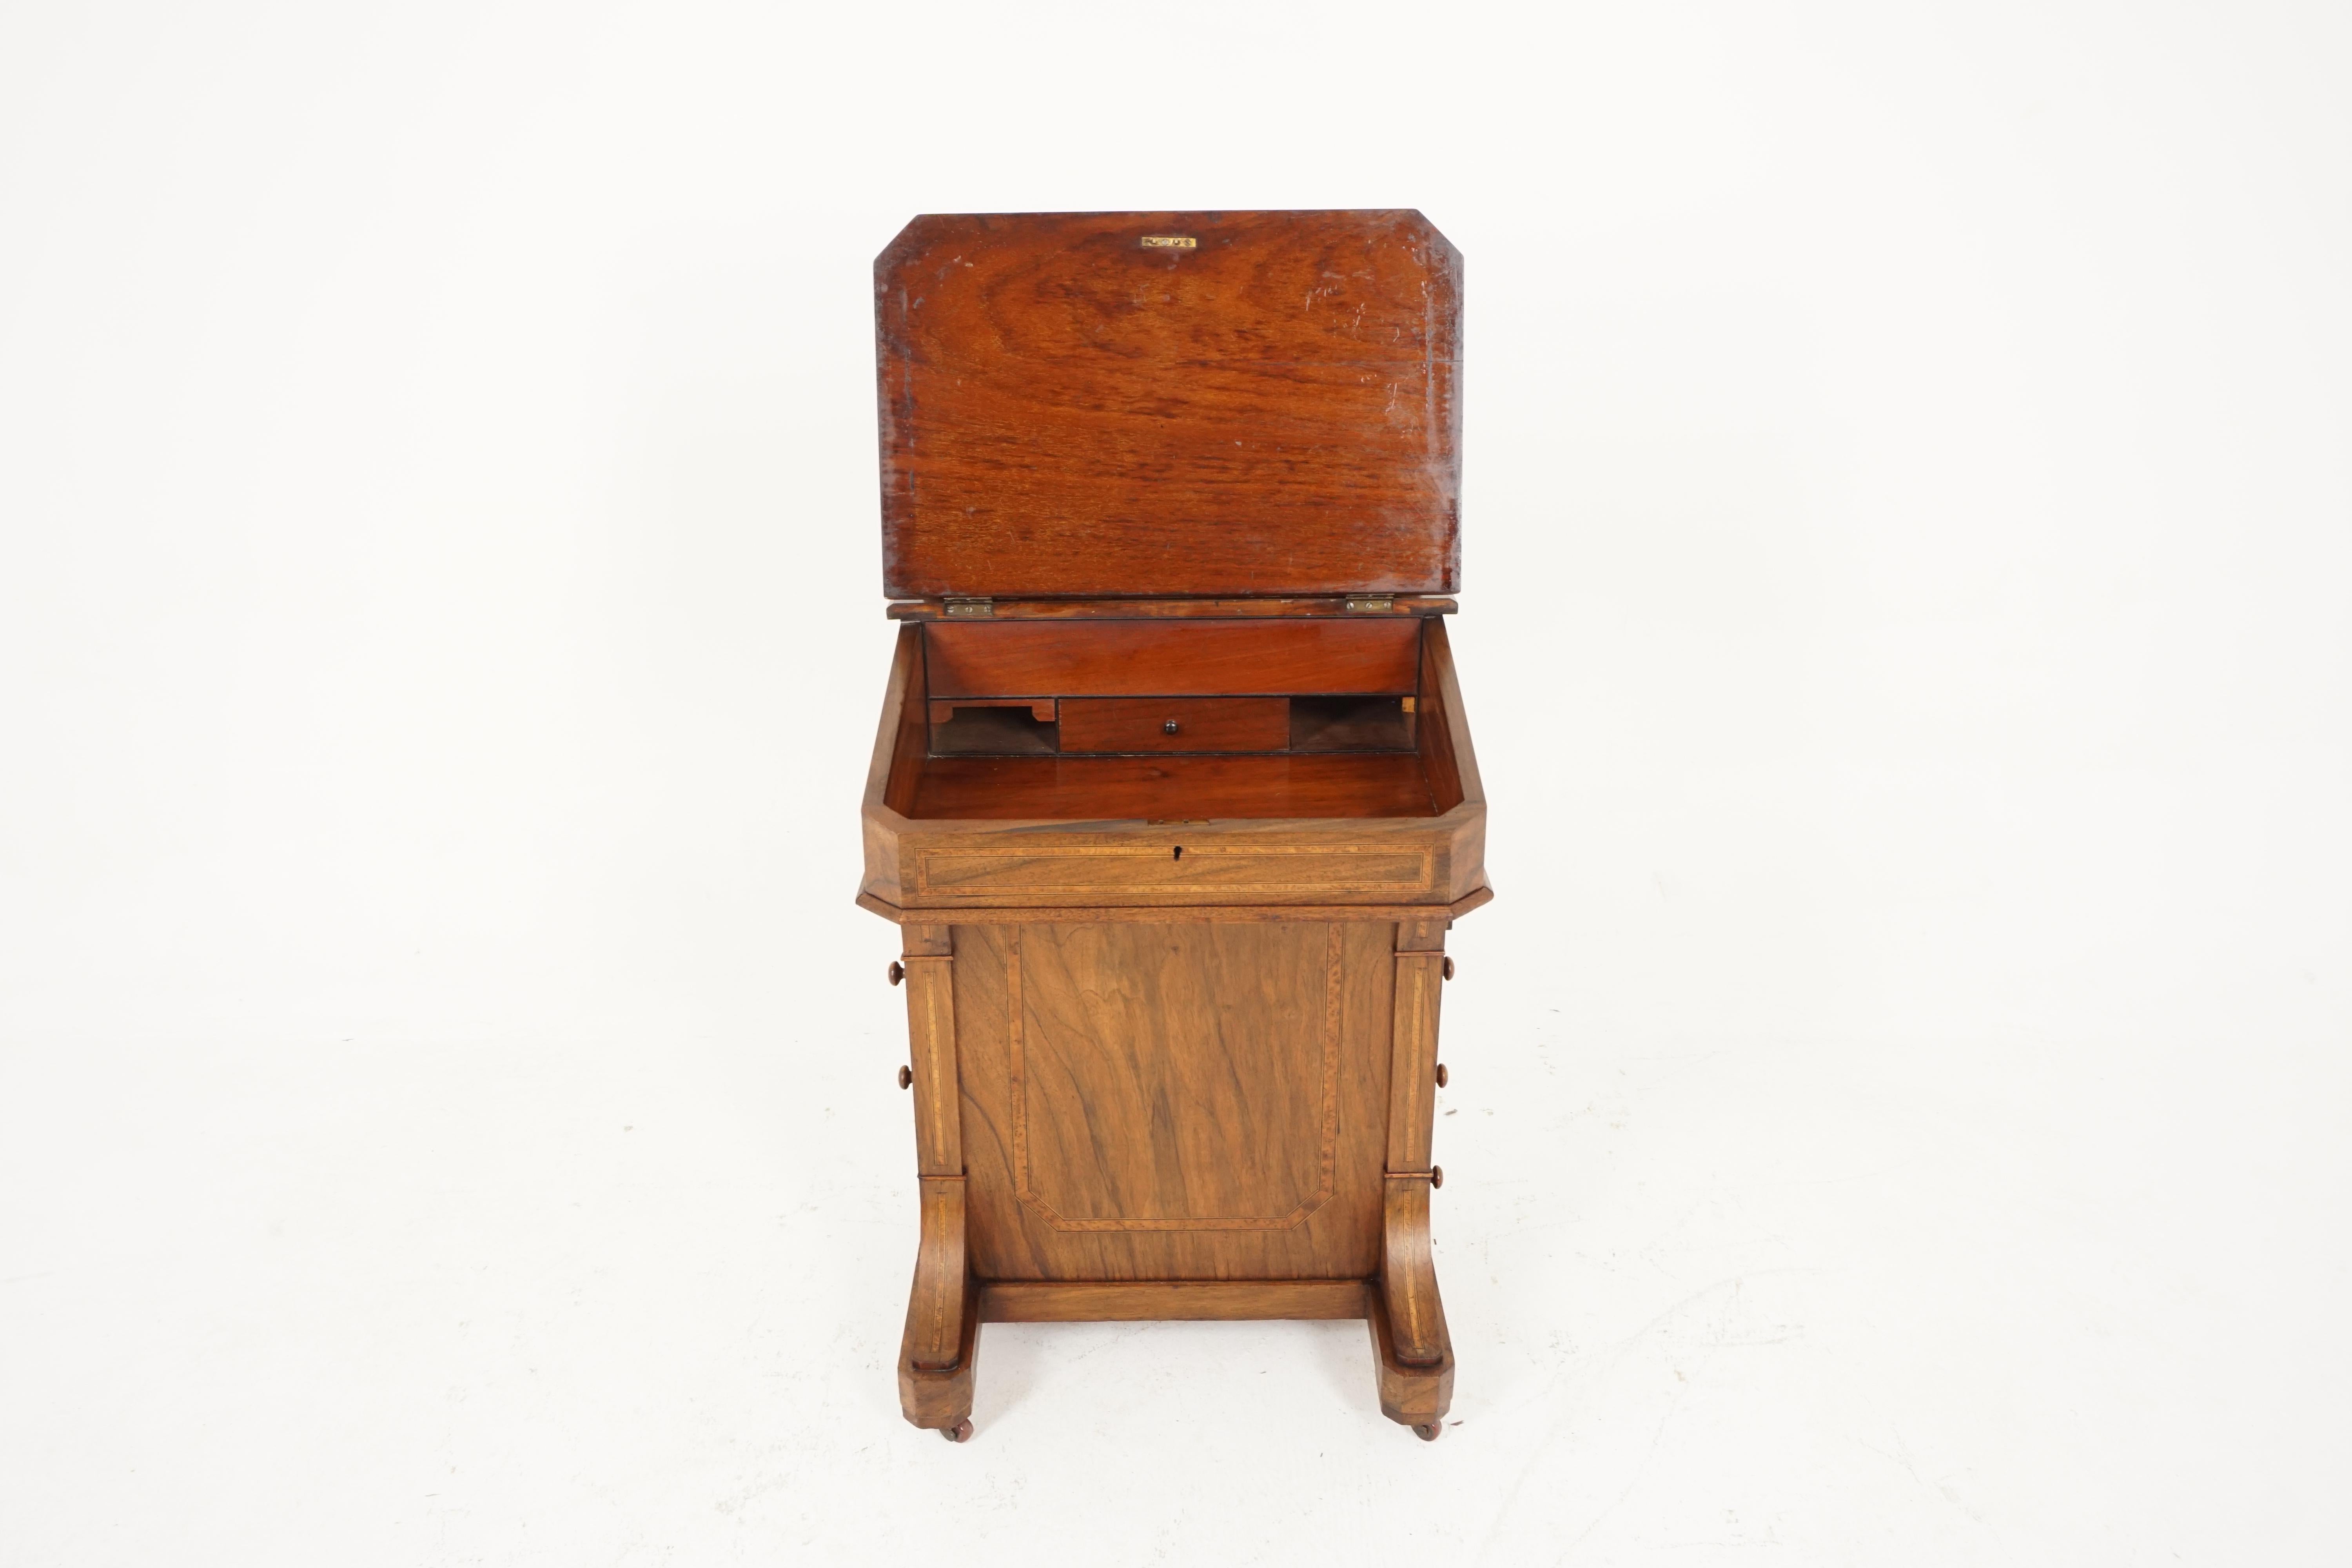 Antique Victorian Davenport desk, walnut writing desk, Scotland 1880, B2377

Scotland 1880
Sloping top with brown leather writing surface
With lifting stationary box on top with pigeon holes and pen holder
The sloping top lifts up and reveals a